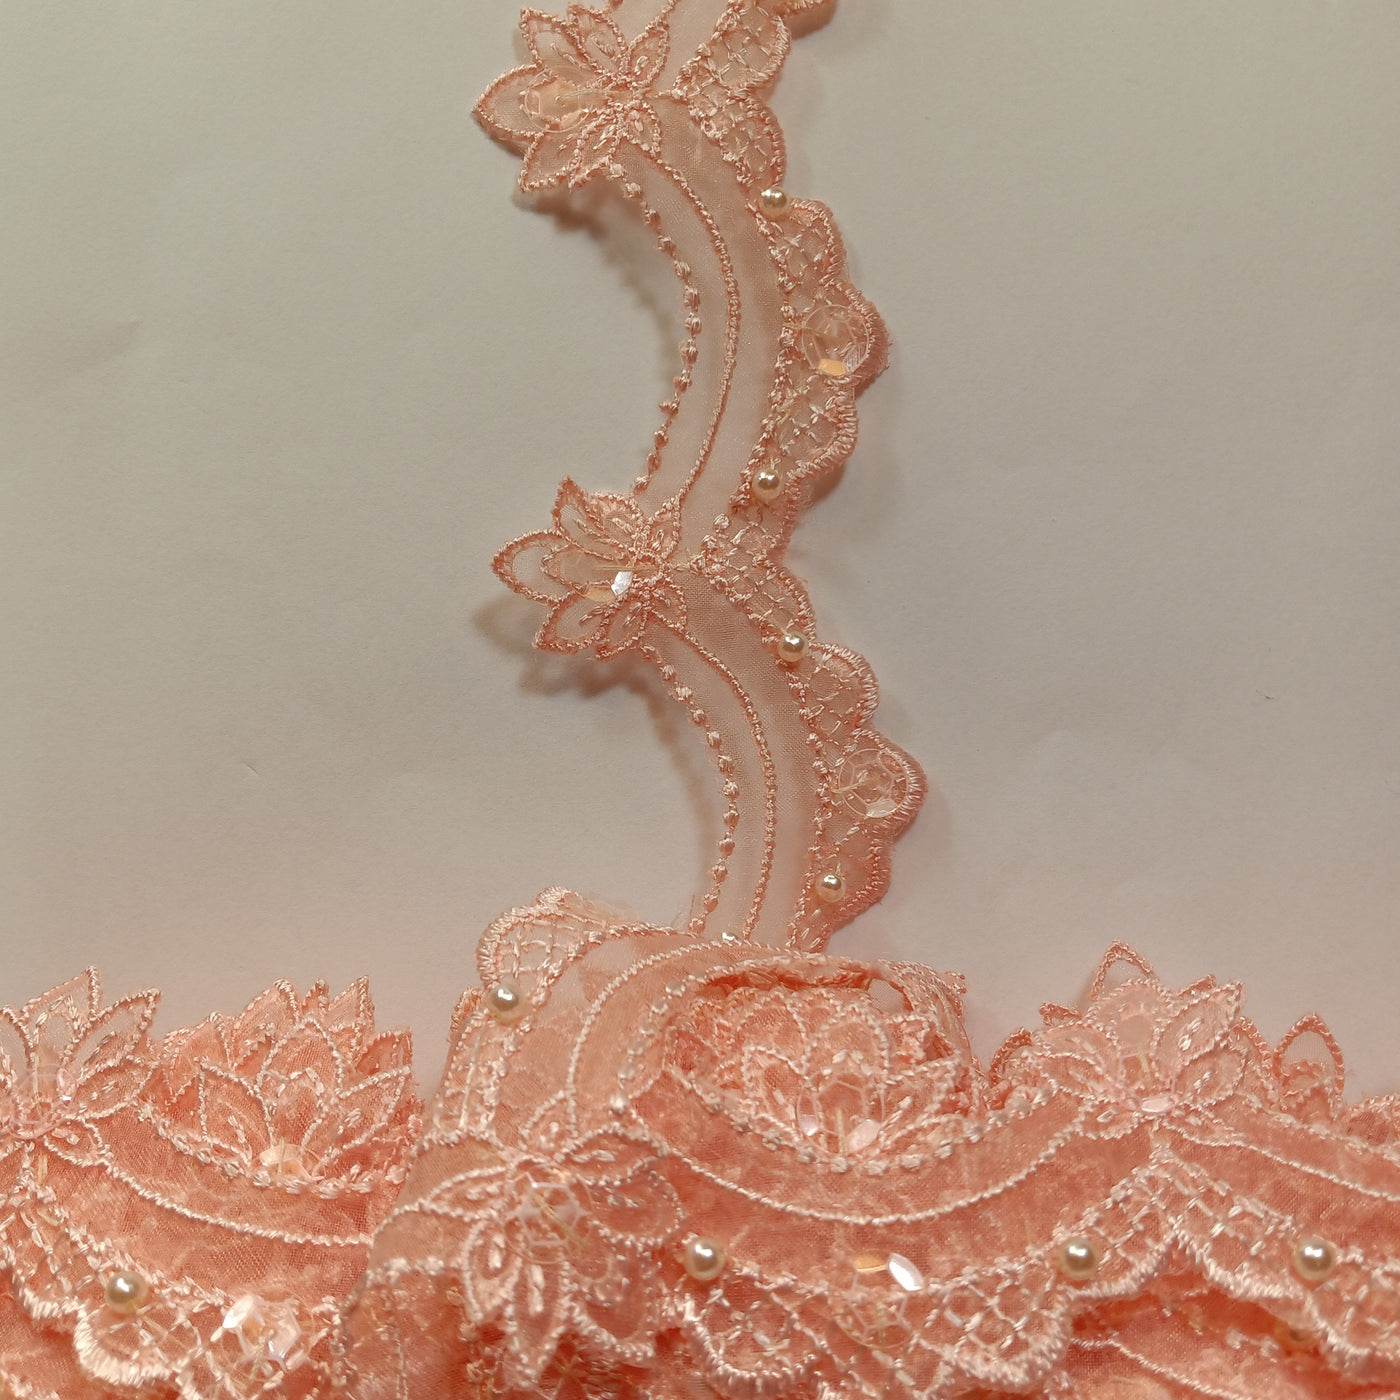 Beaded Peach Lace Trim Embroidered on 100% Polyester Organza . Large Arch Scalloped Trim. Formal Trim. Perfect for Edging and Gowns.  Sold by the Yard.  Lace Usa